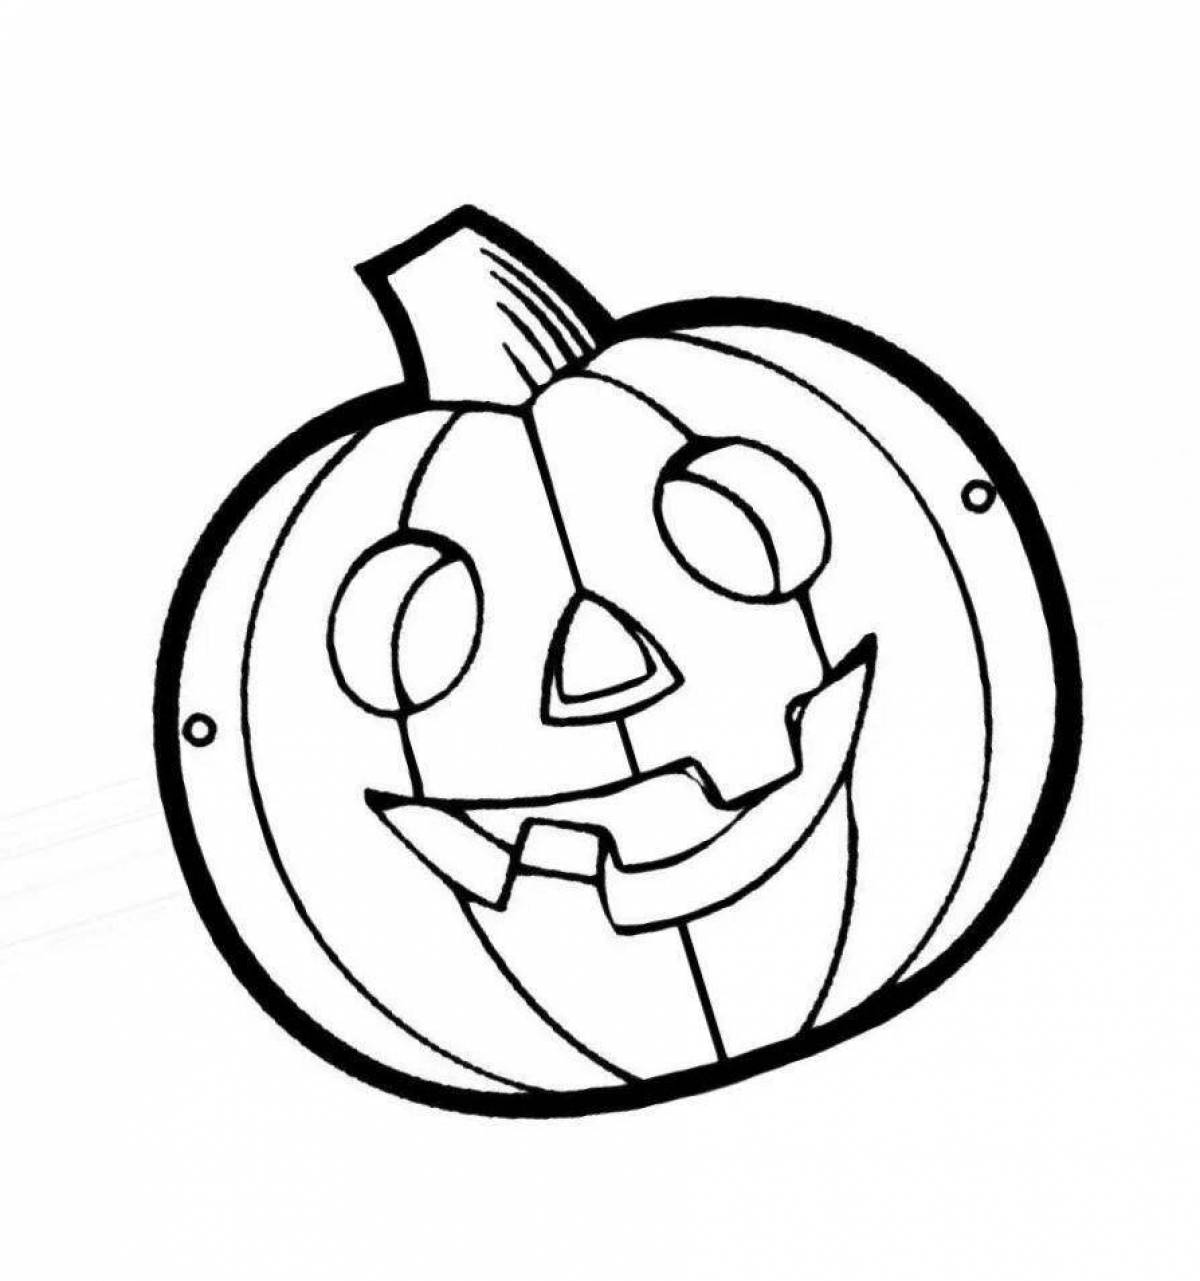 Scary halloween pumpkin coloring page